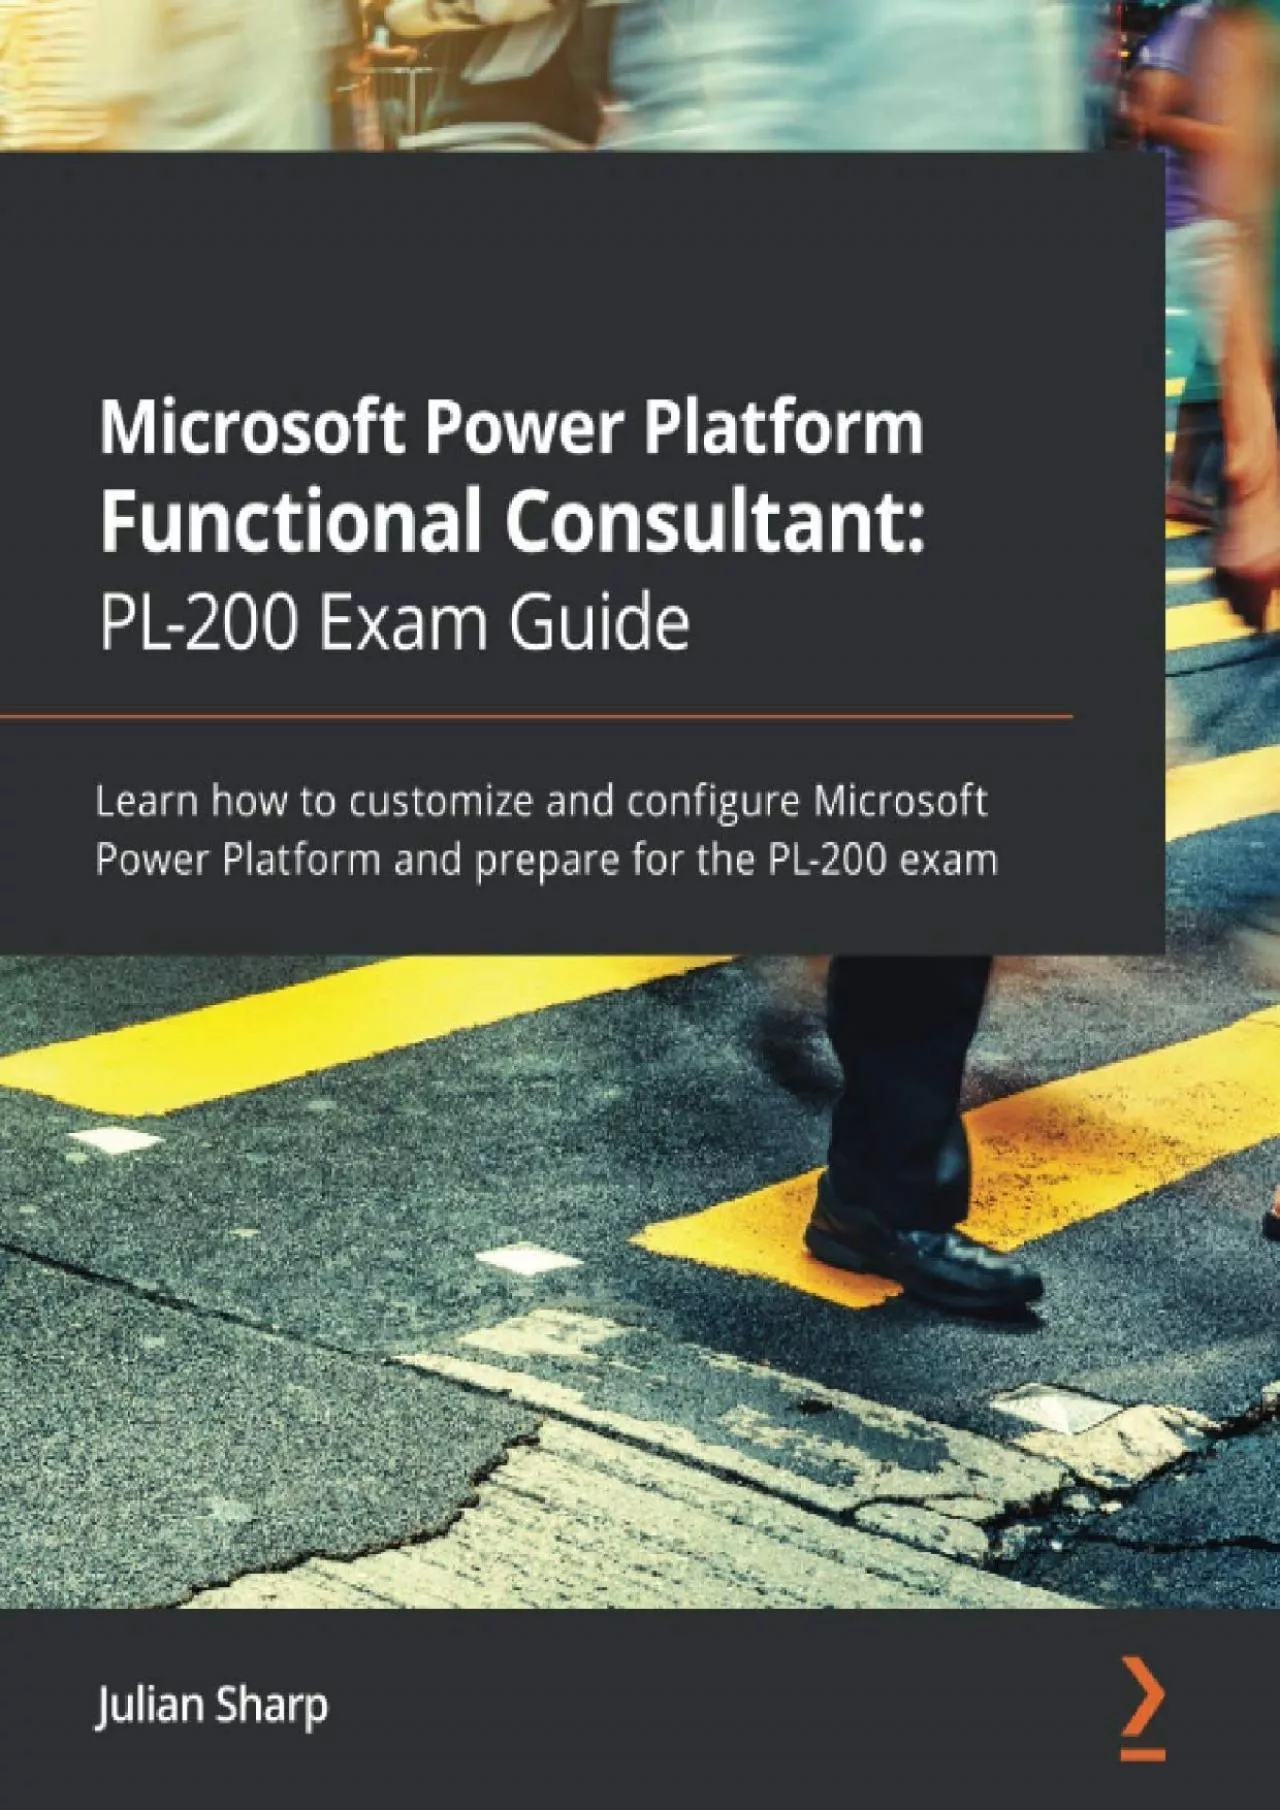 (BOOK)-Microsoft Power Platform Functional Consultant: PL-200 Exam Guide: Learn how to